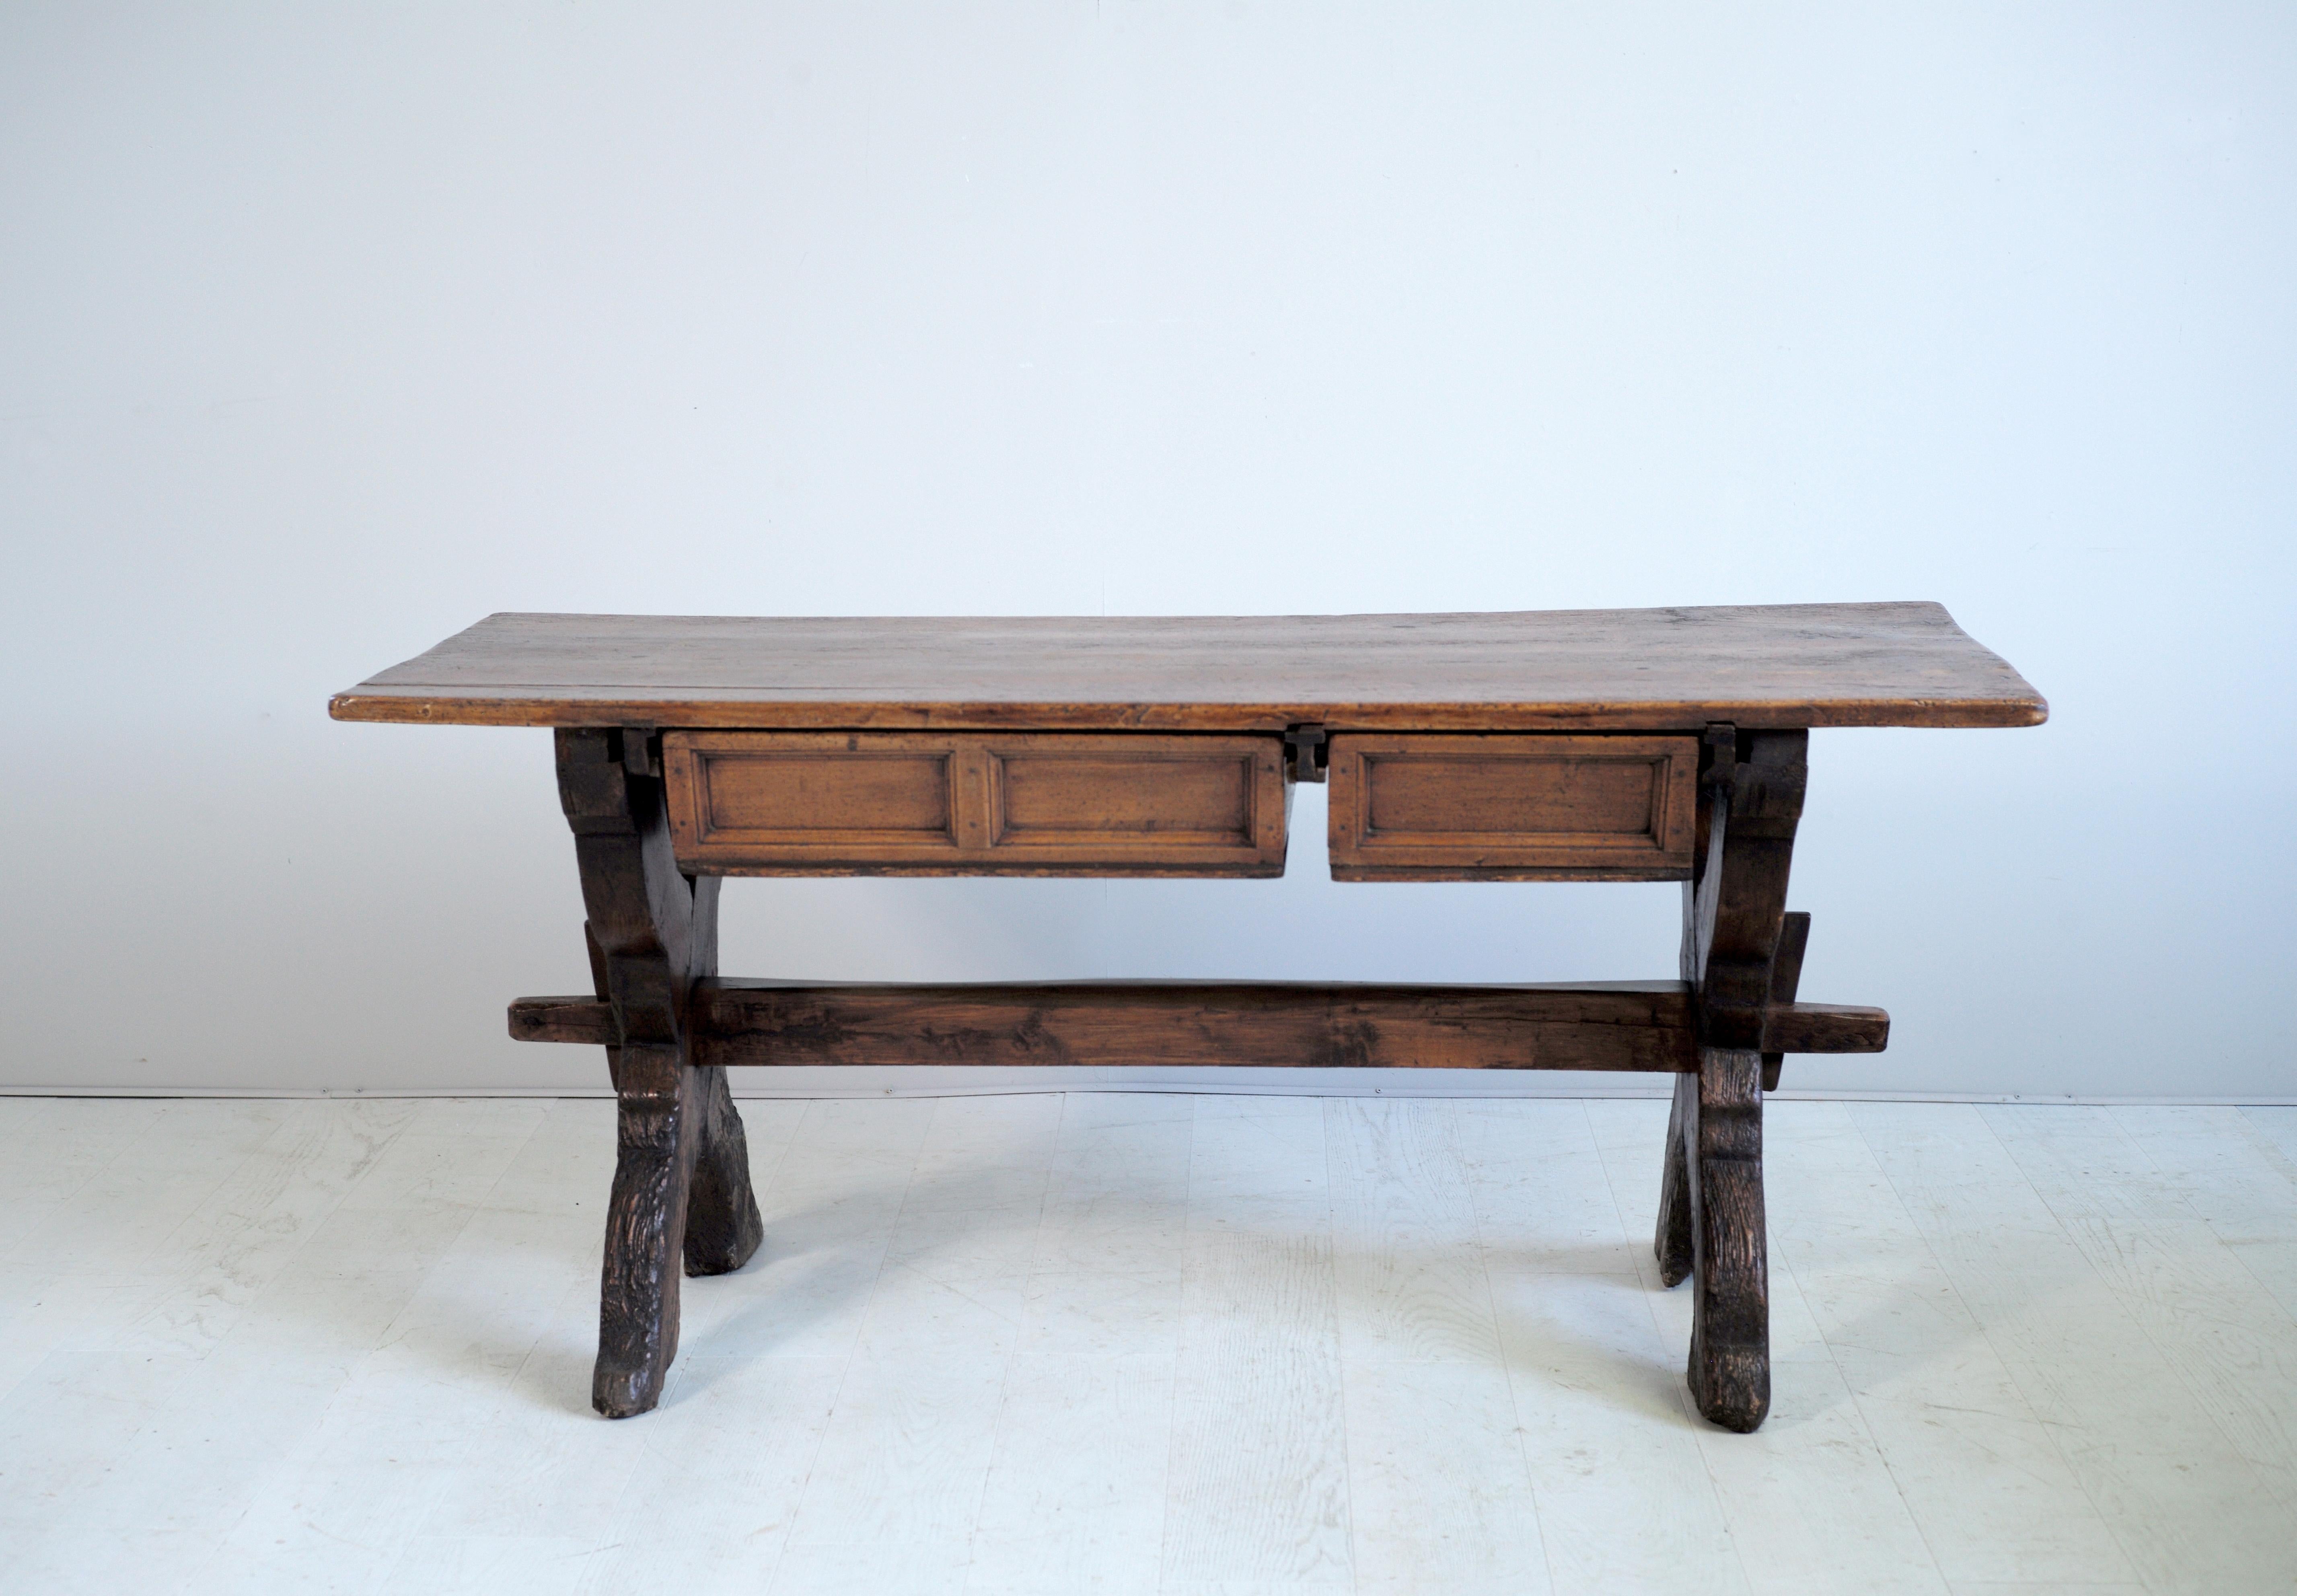 Exceptional Swiss changer table with two drawers in Larch and Alder dating from the early 17th century. The plateau in Alder is based on a double base cross larch joined by a wide cross keyed. A large and a small drawer slide on both sides of the